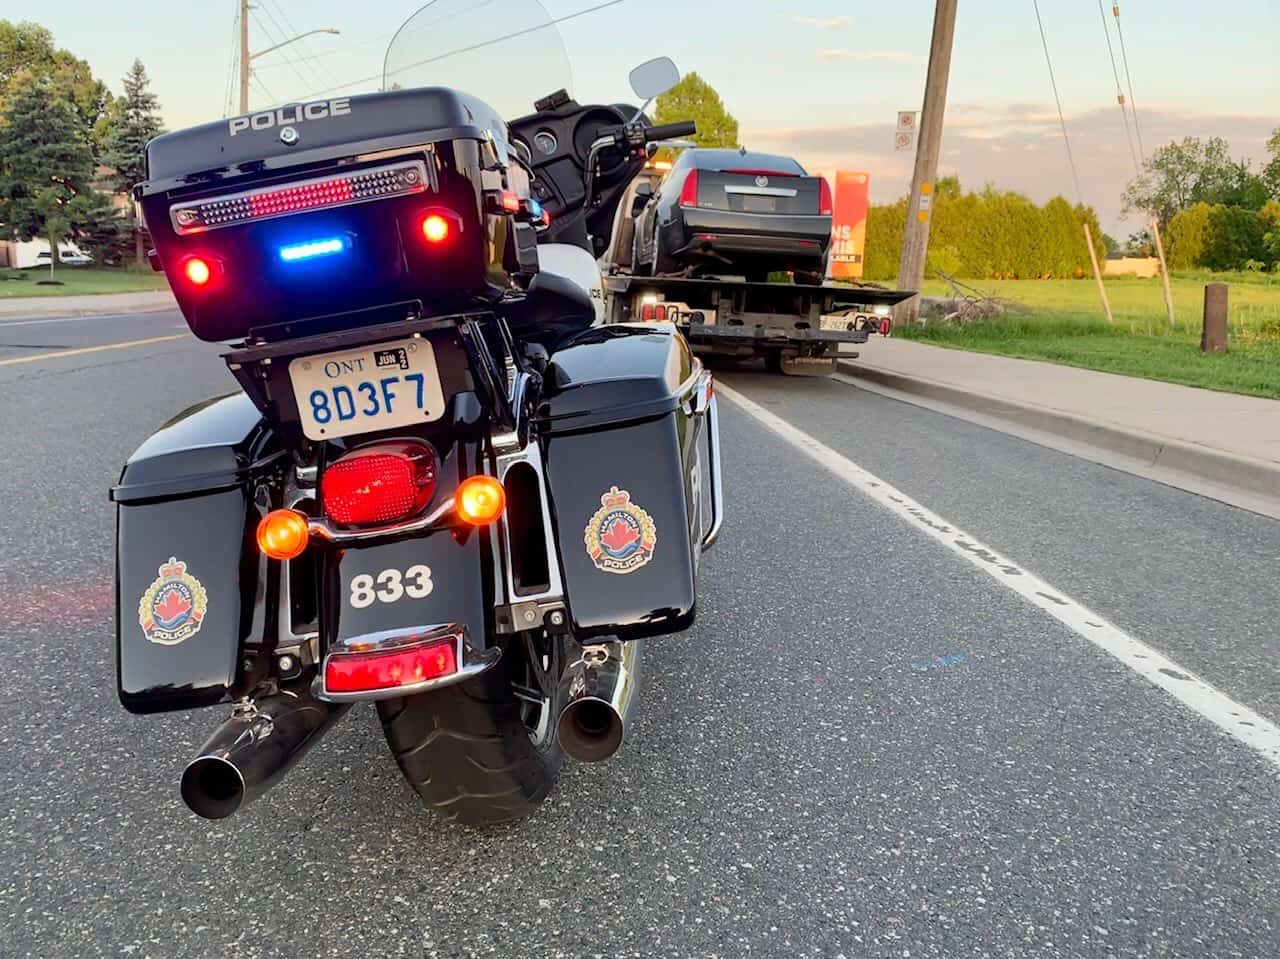 The rear-end of a Hamilton Police Service motorcycle on the side of the road with a vehicle on a flat-bed truck in the background.